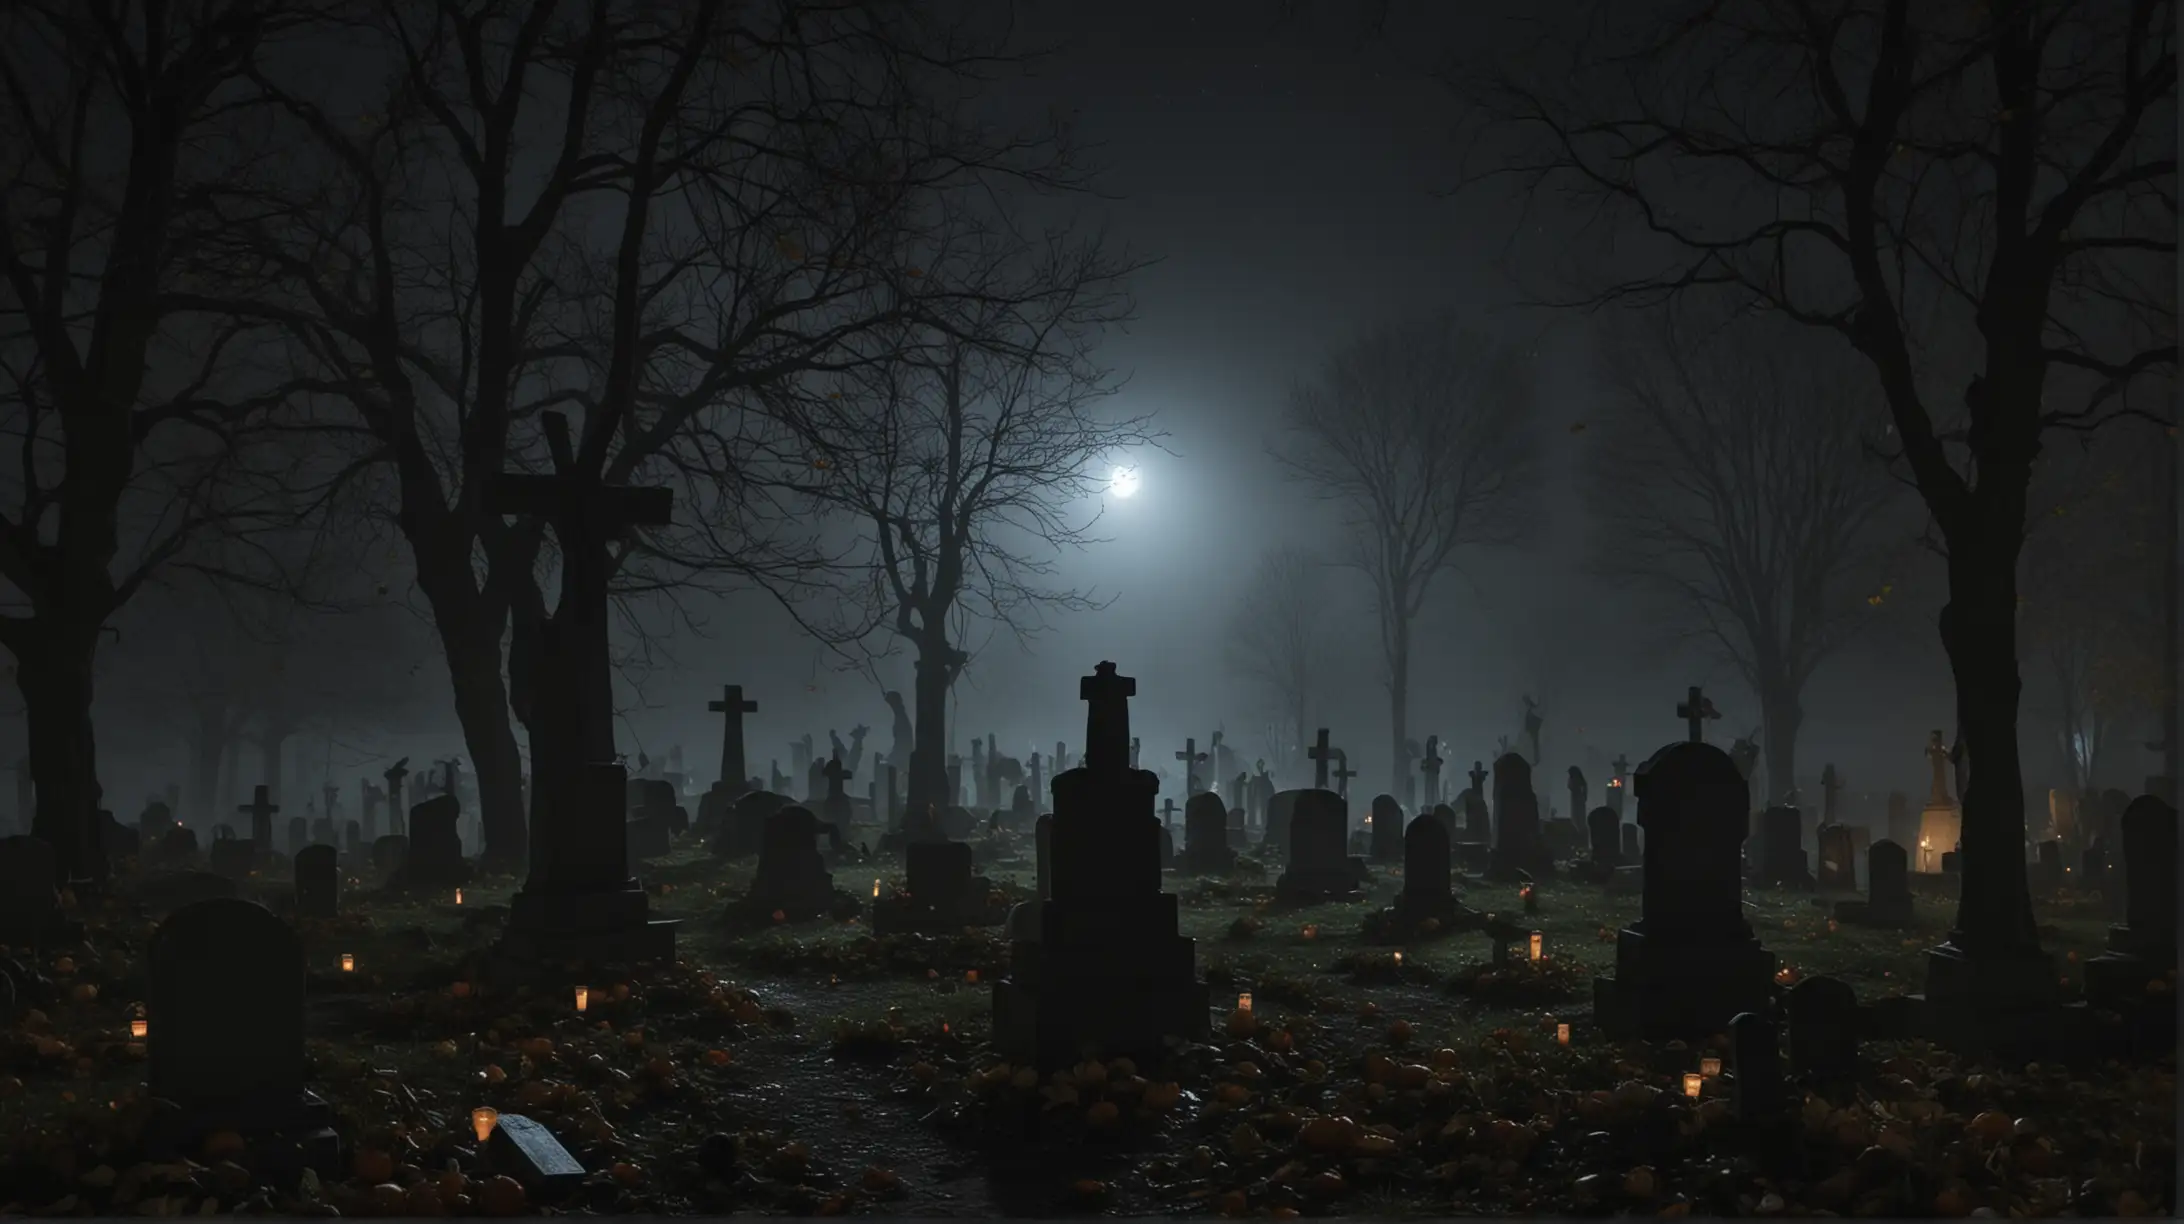 Spooky Halloween Night at a Small Village Cemetery